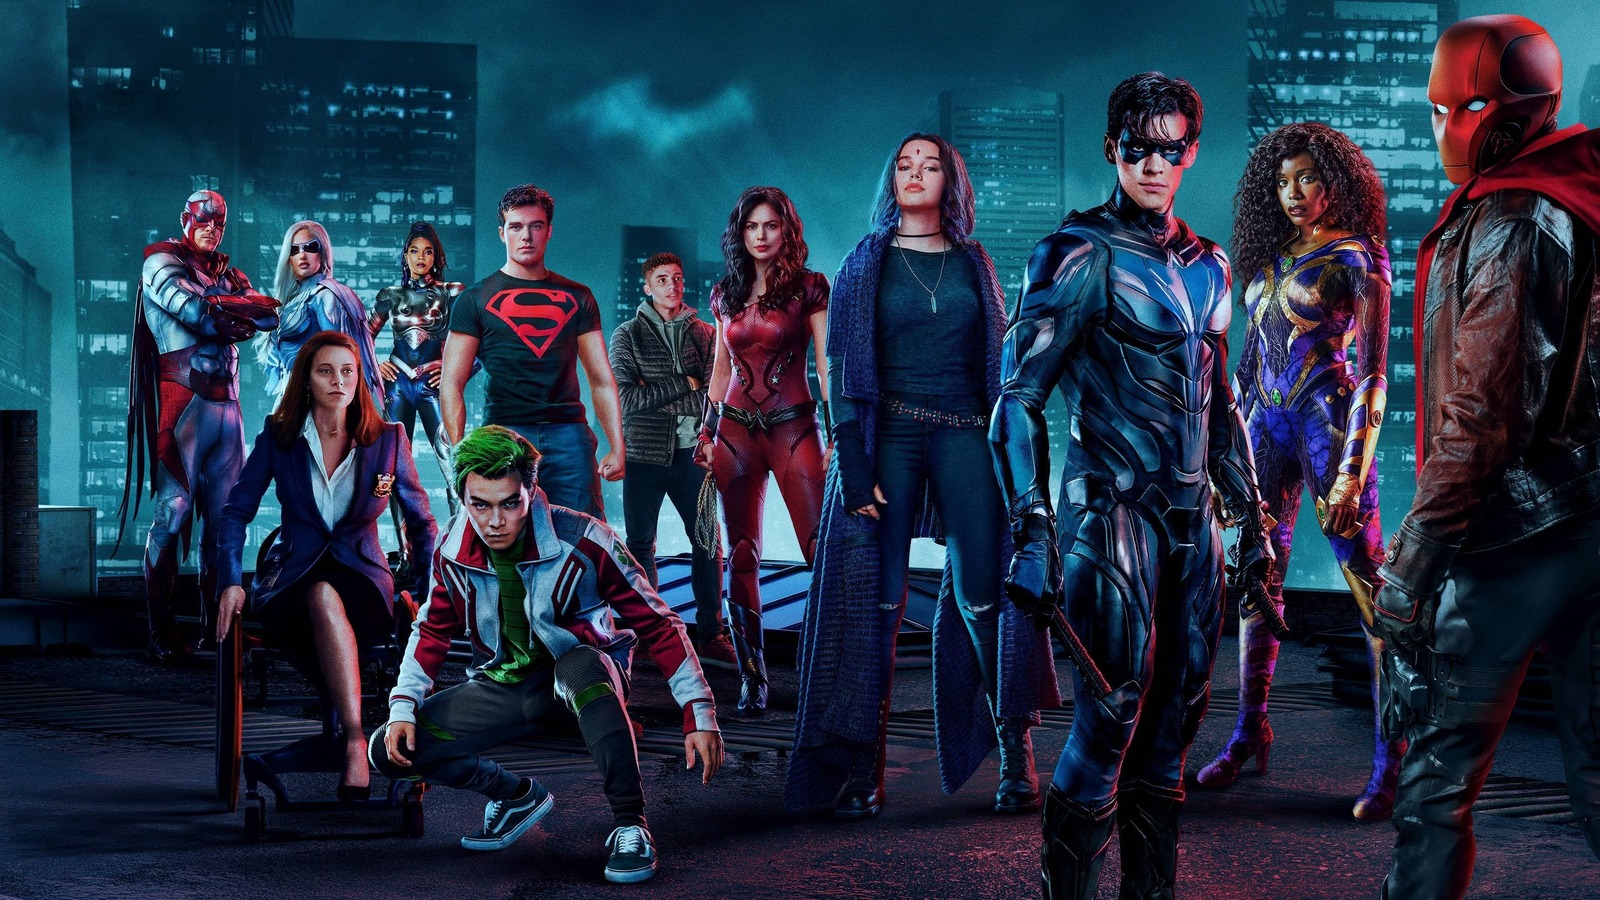 Titans Season 4 Photos Reveal First Look at the Series' New Villains